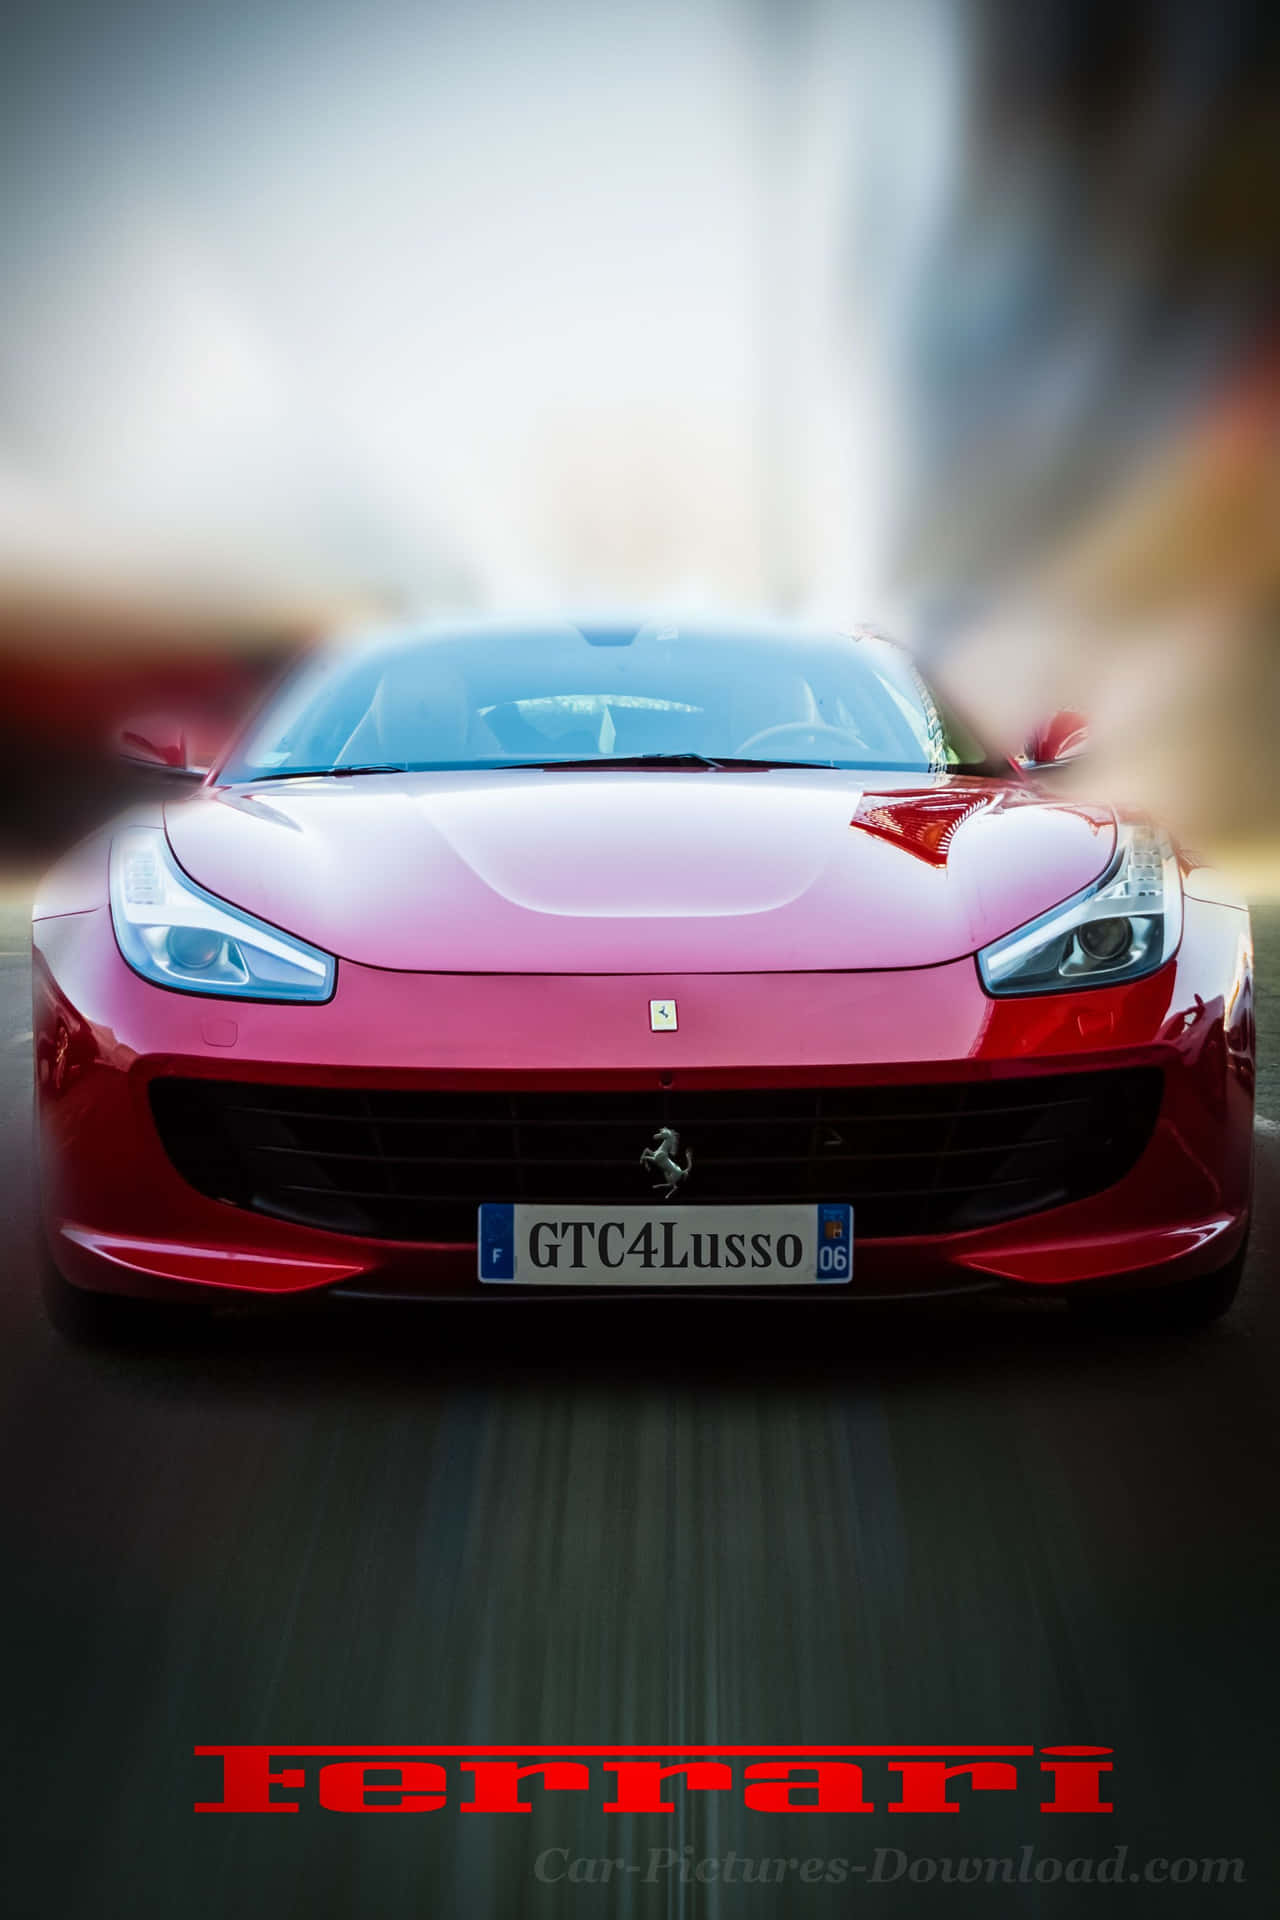 “The sleek style and power of Cool Ferrari Cars.” Wallpaper